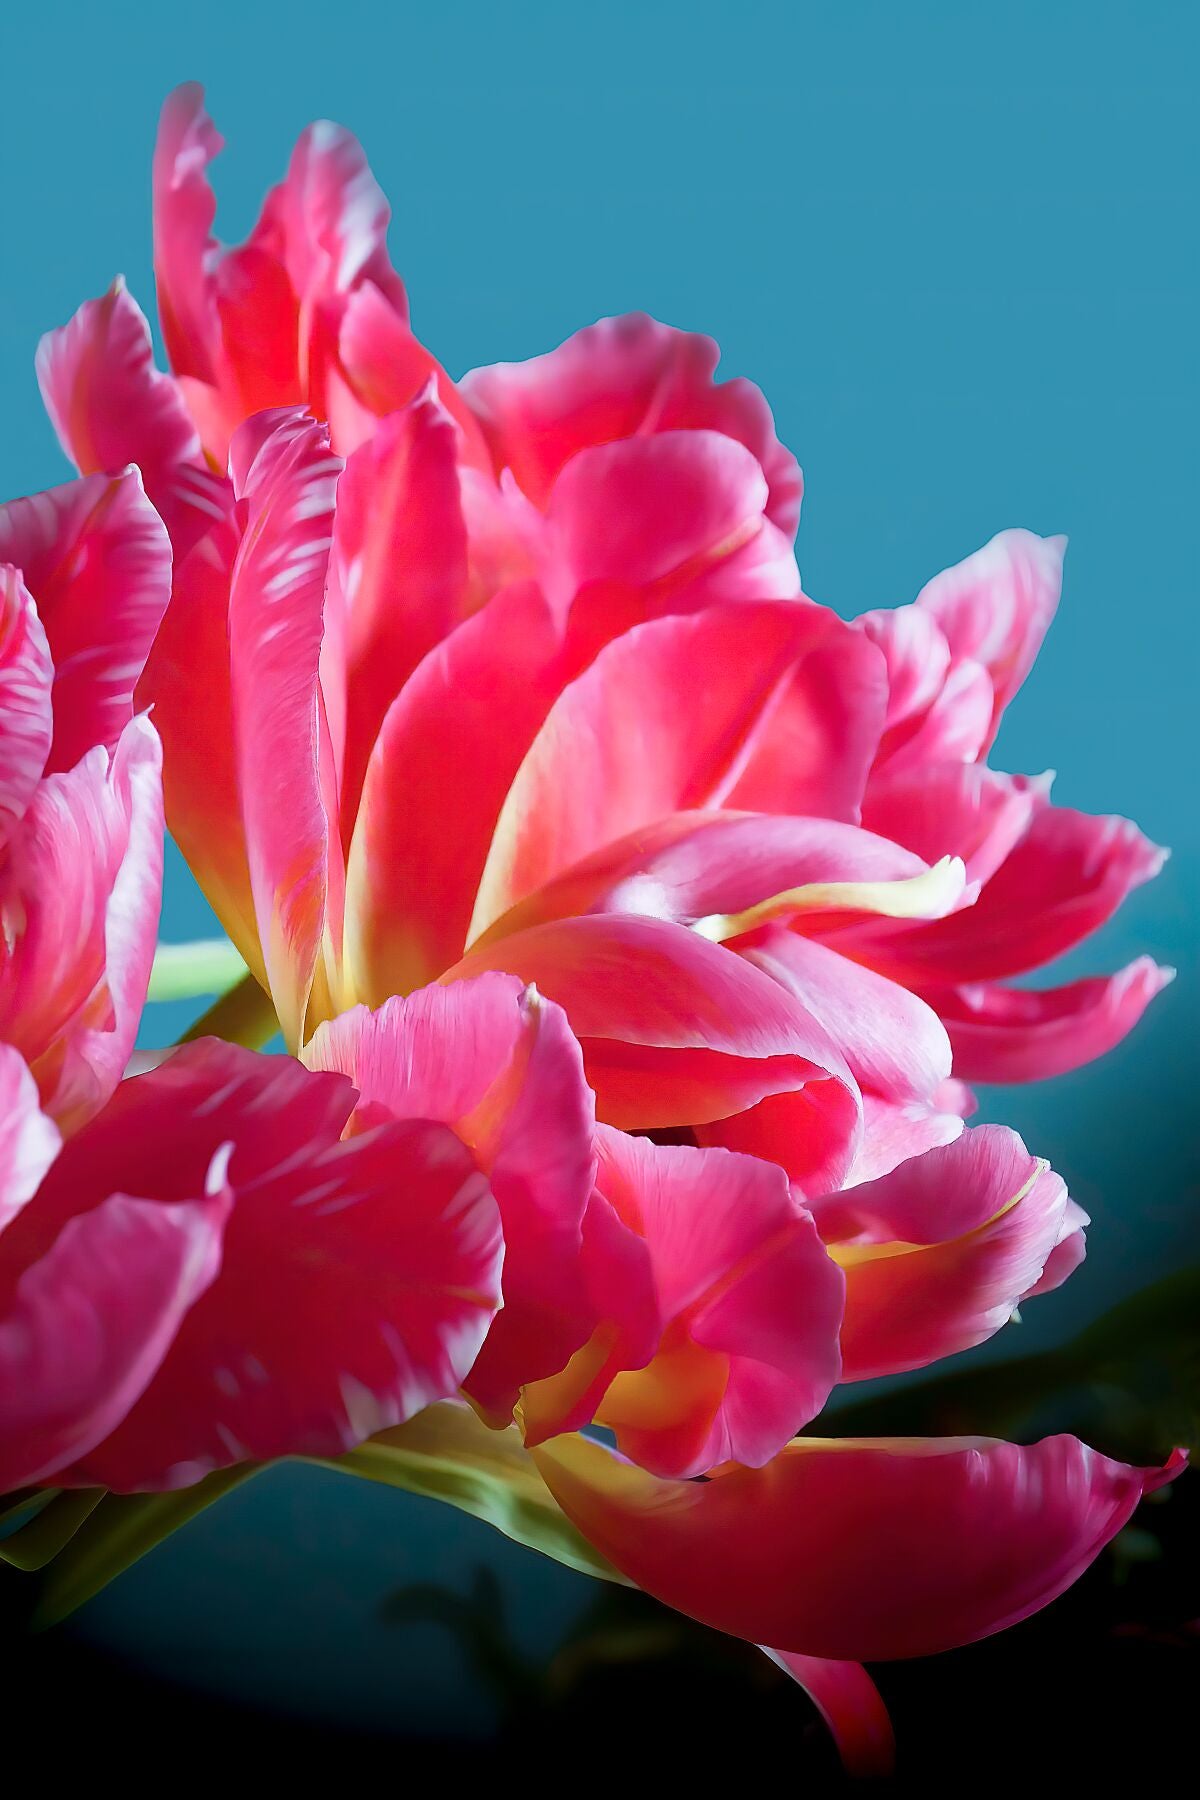 Pink Parrot Tulips bouquet in sunlight close up